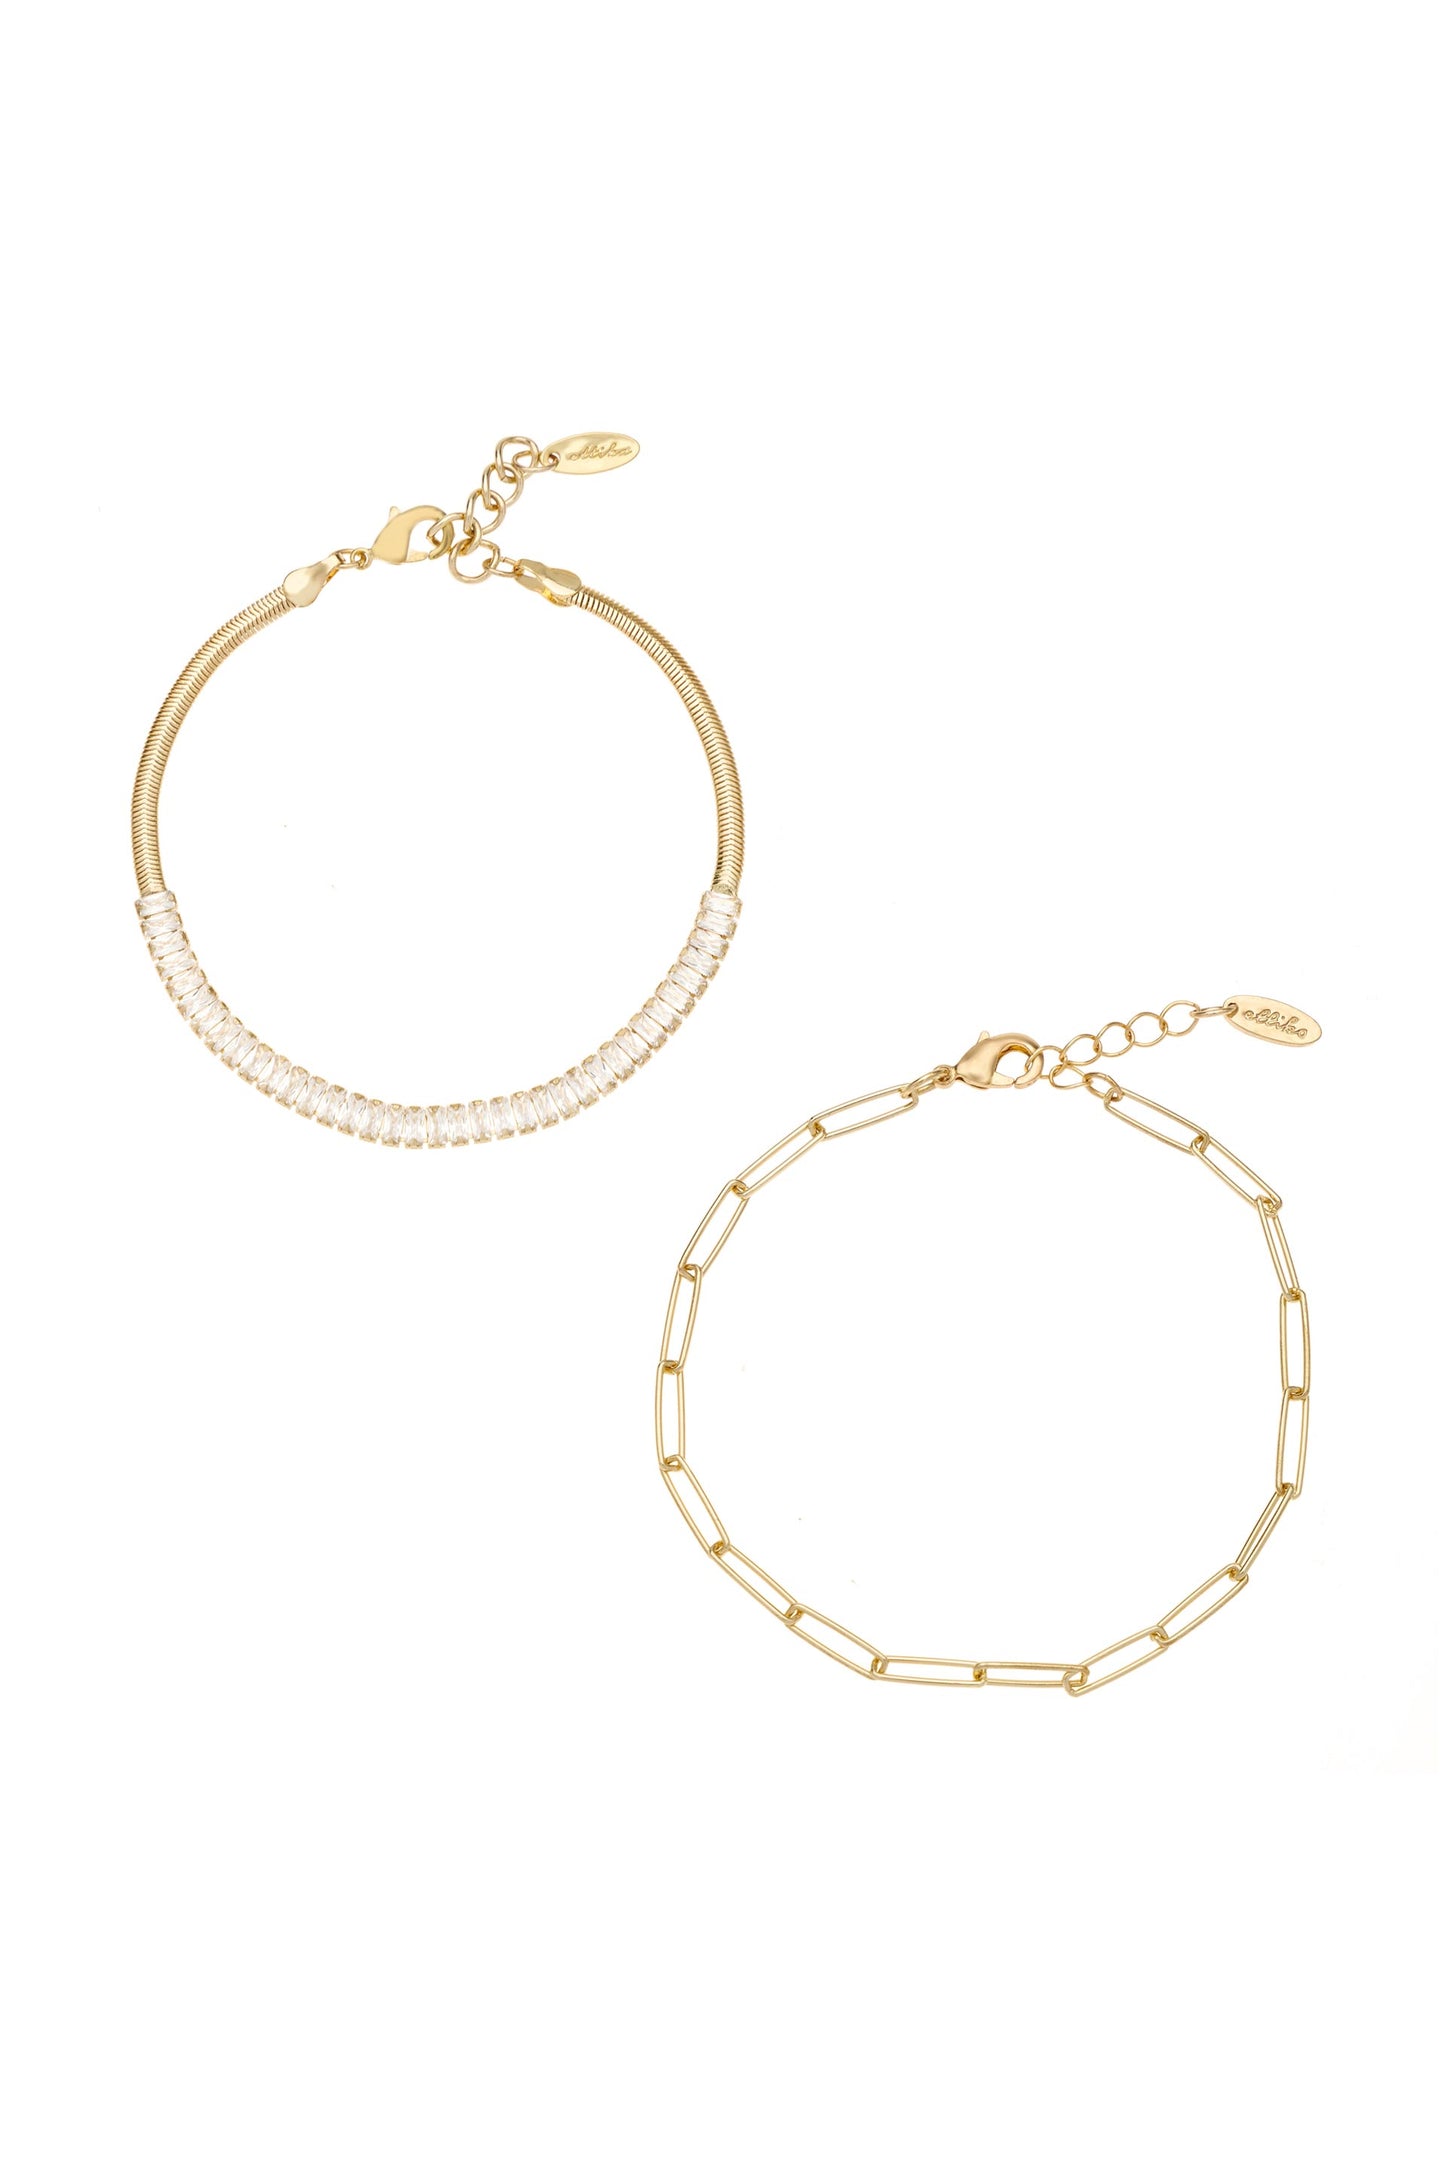 Links and Shine 18k Gold Plated Anklet Set of 2 on white background